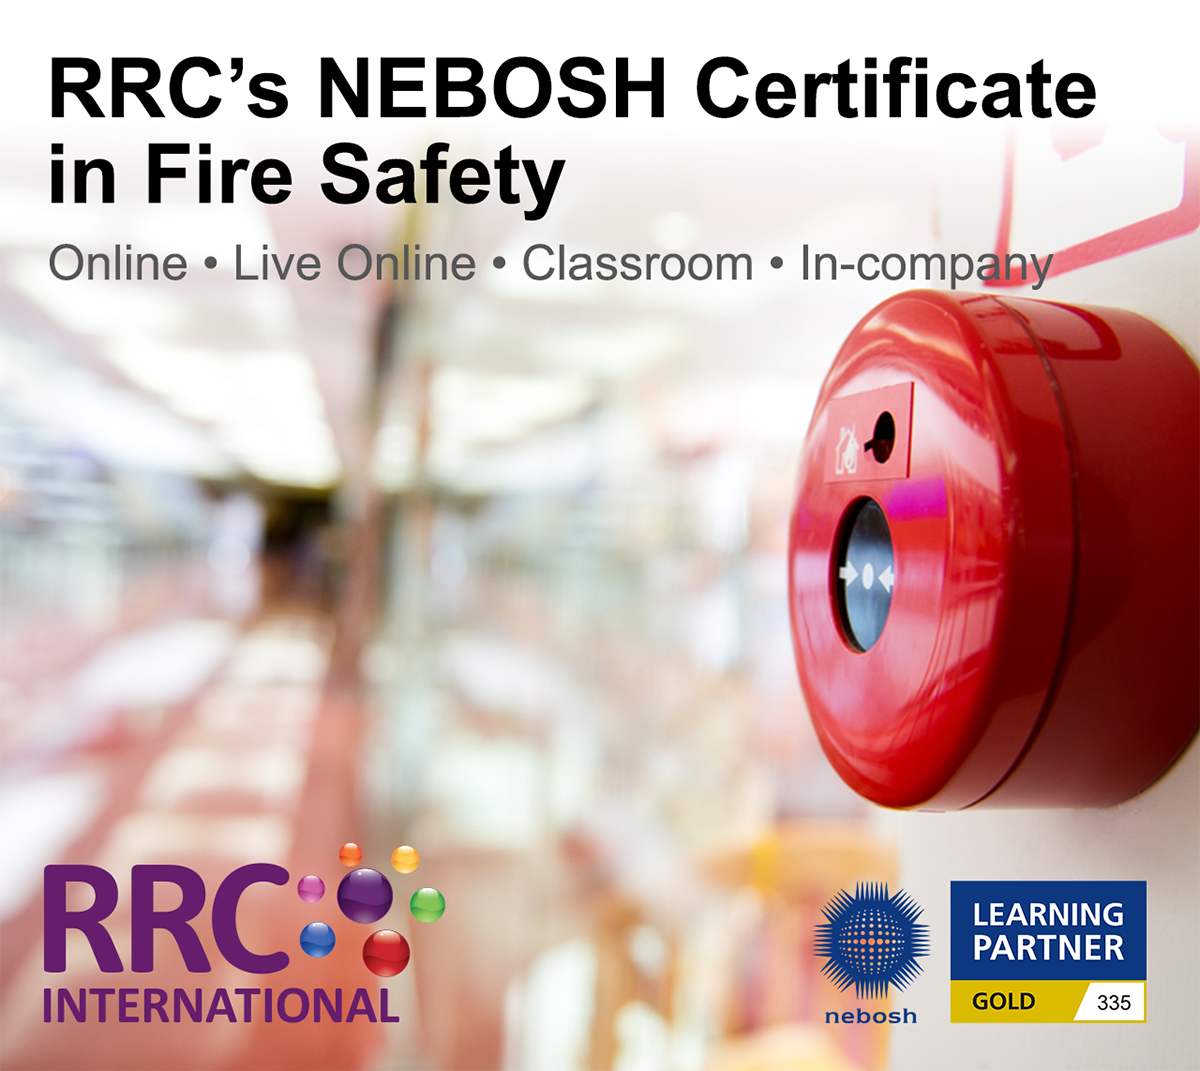 RRC's NEBOSH Certificate in Fire Safety